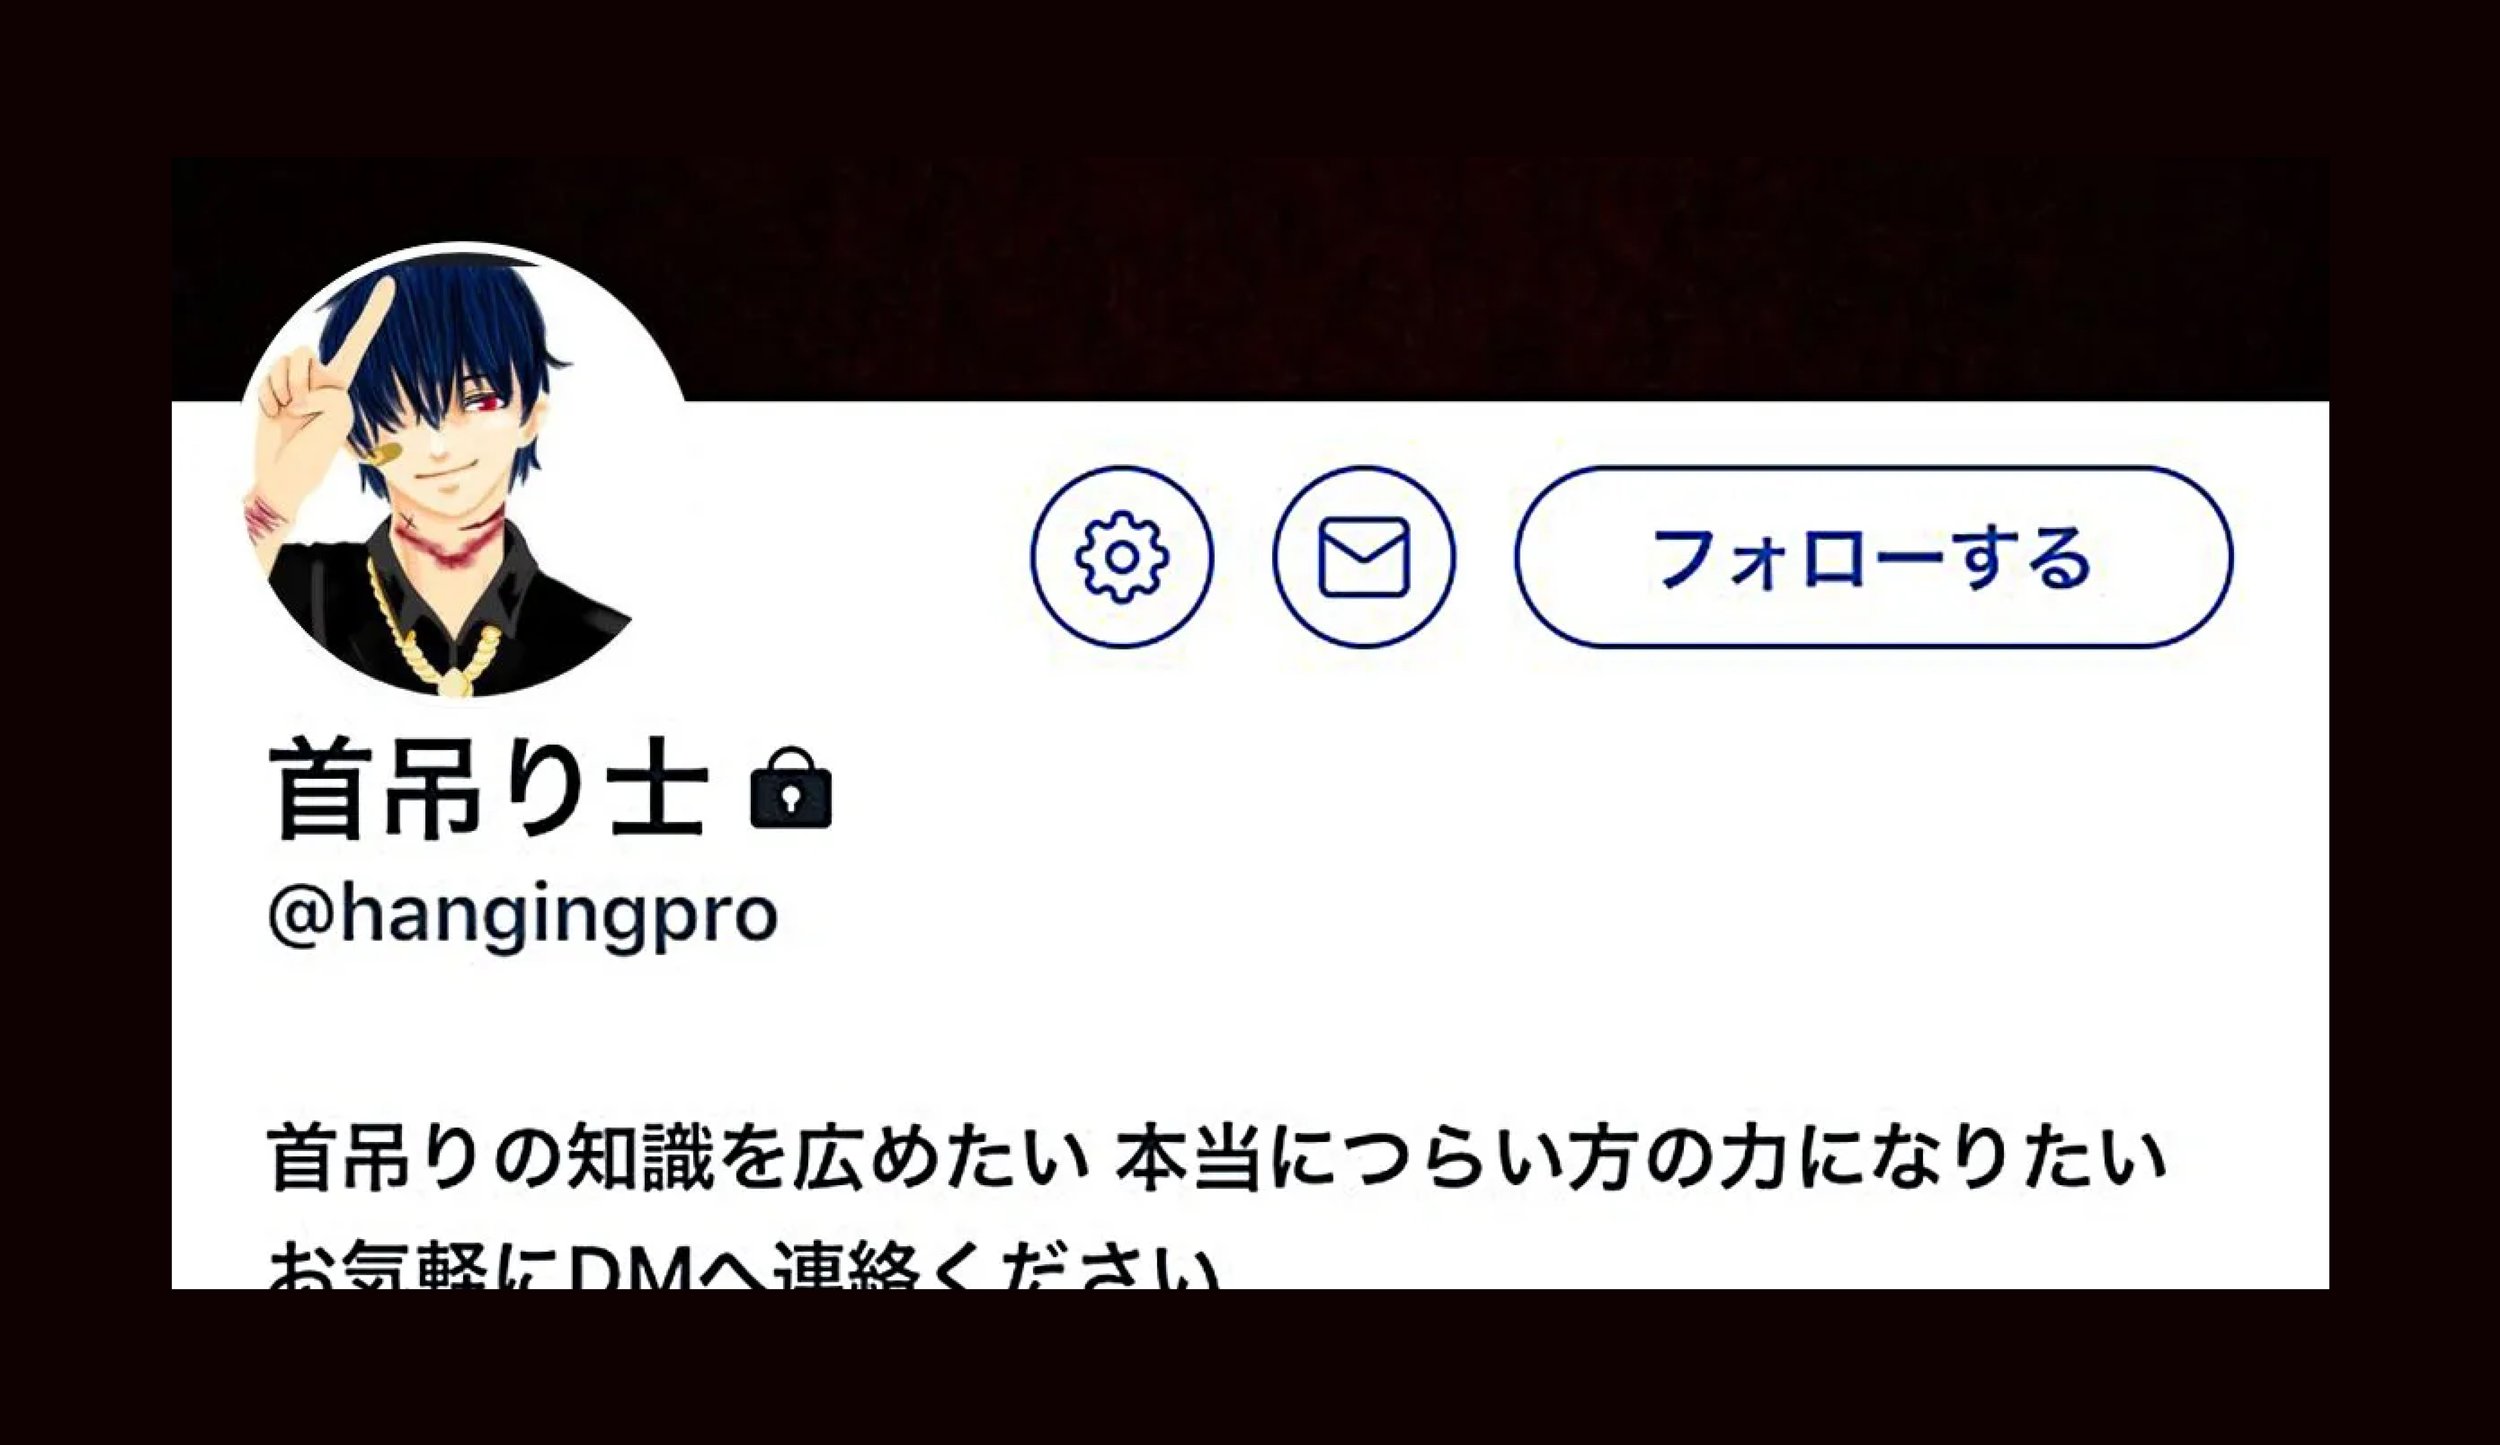  His Twitter profile for @hangingpro 